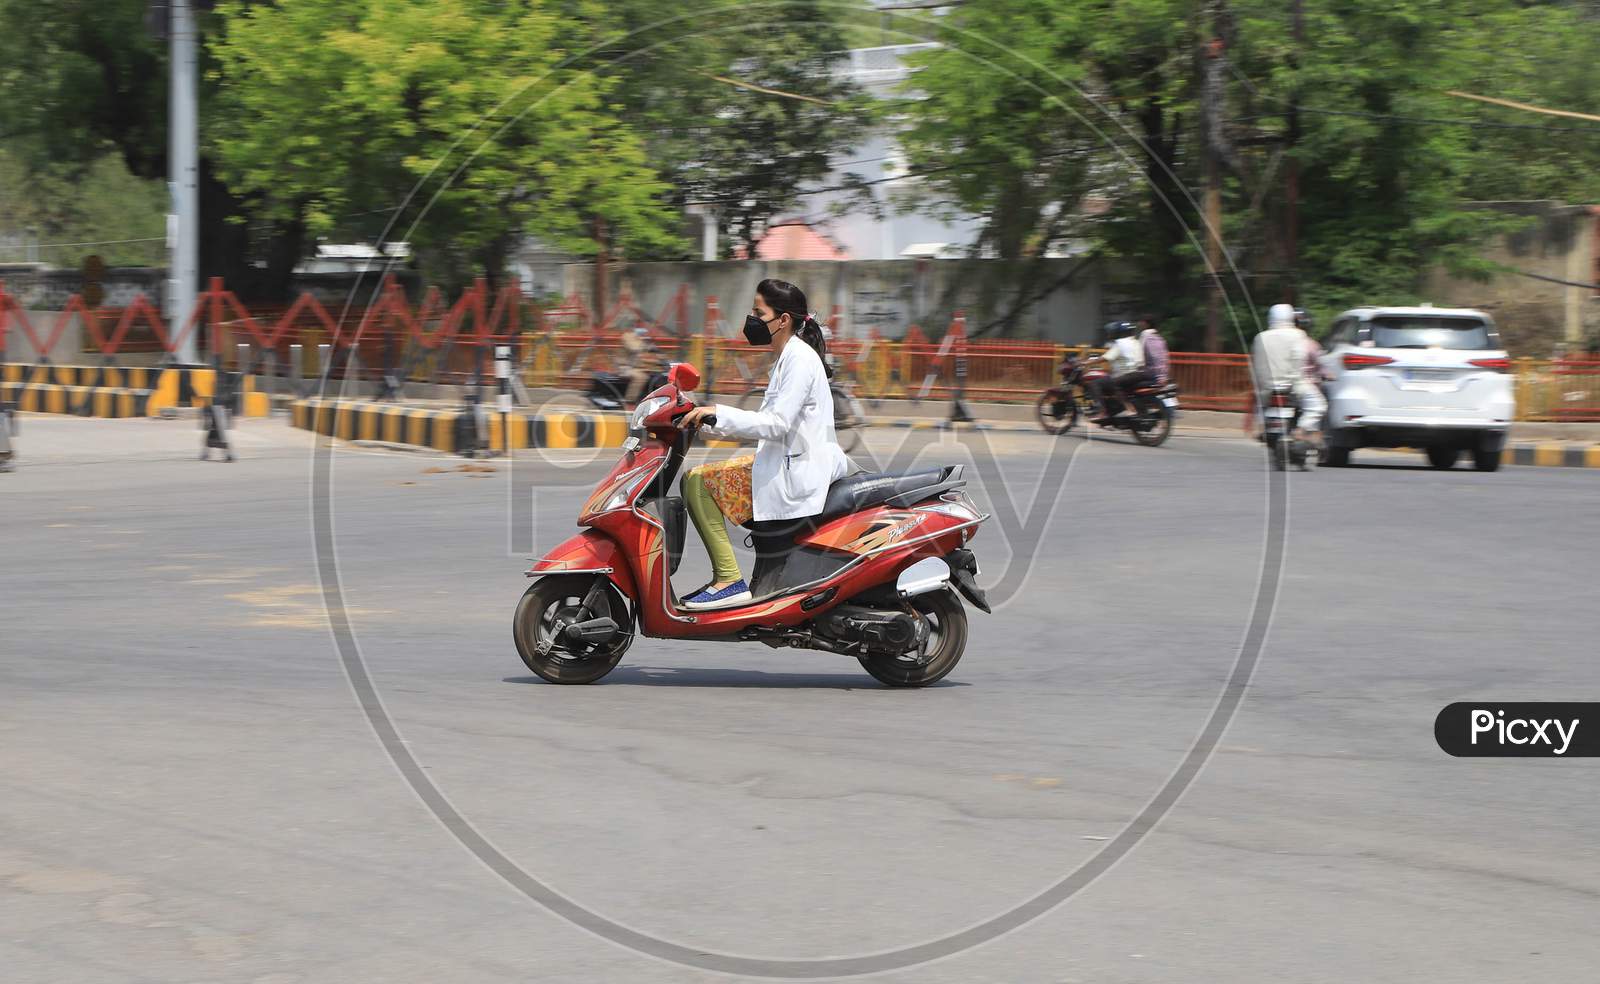 A Lady Doctor Rides Scooty On The Road During A Nationwide Lockdown To Slow The Spreading Of The Corona virus Disease (Covid-19), In Prayagraj, April, 17, 2020.